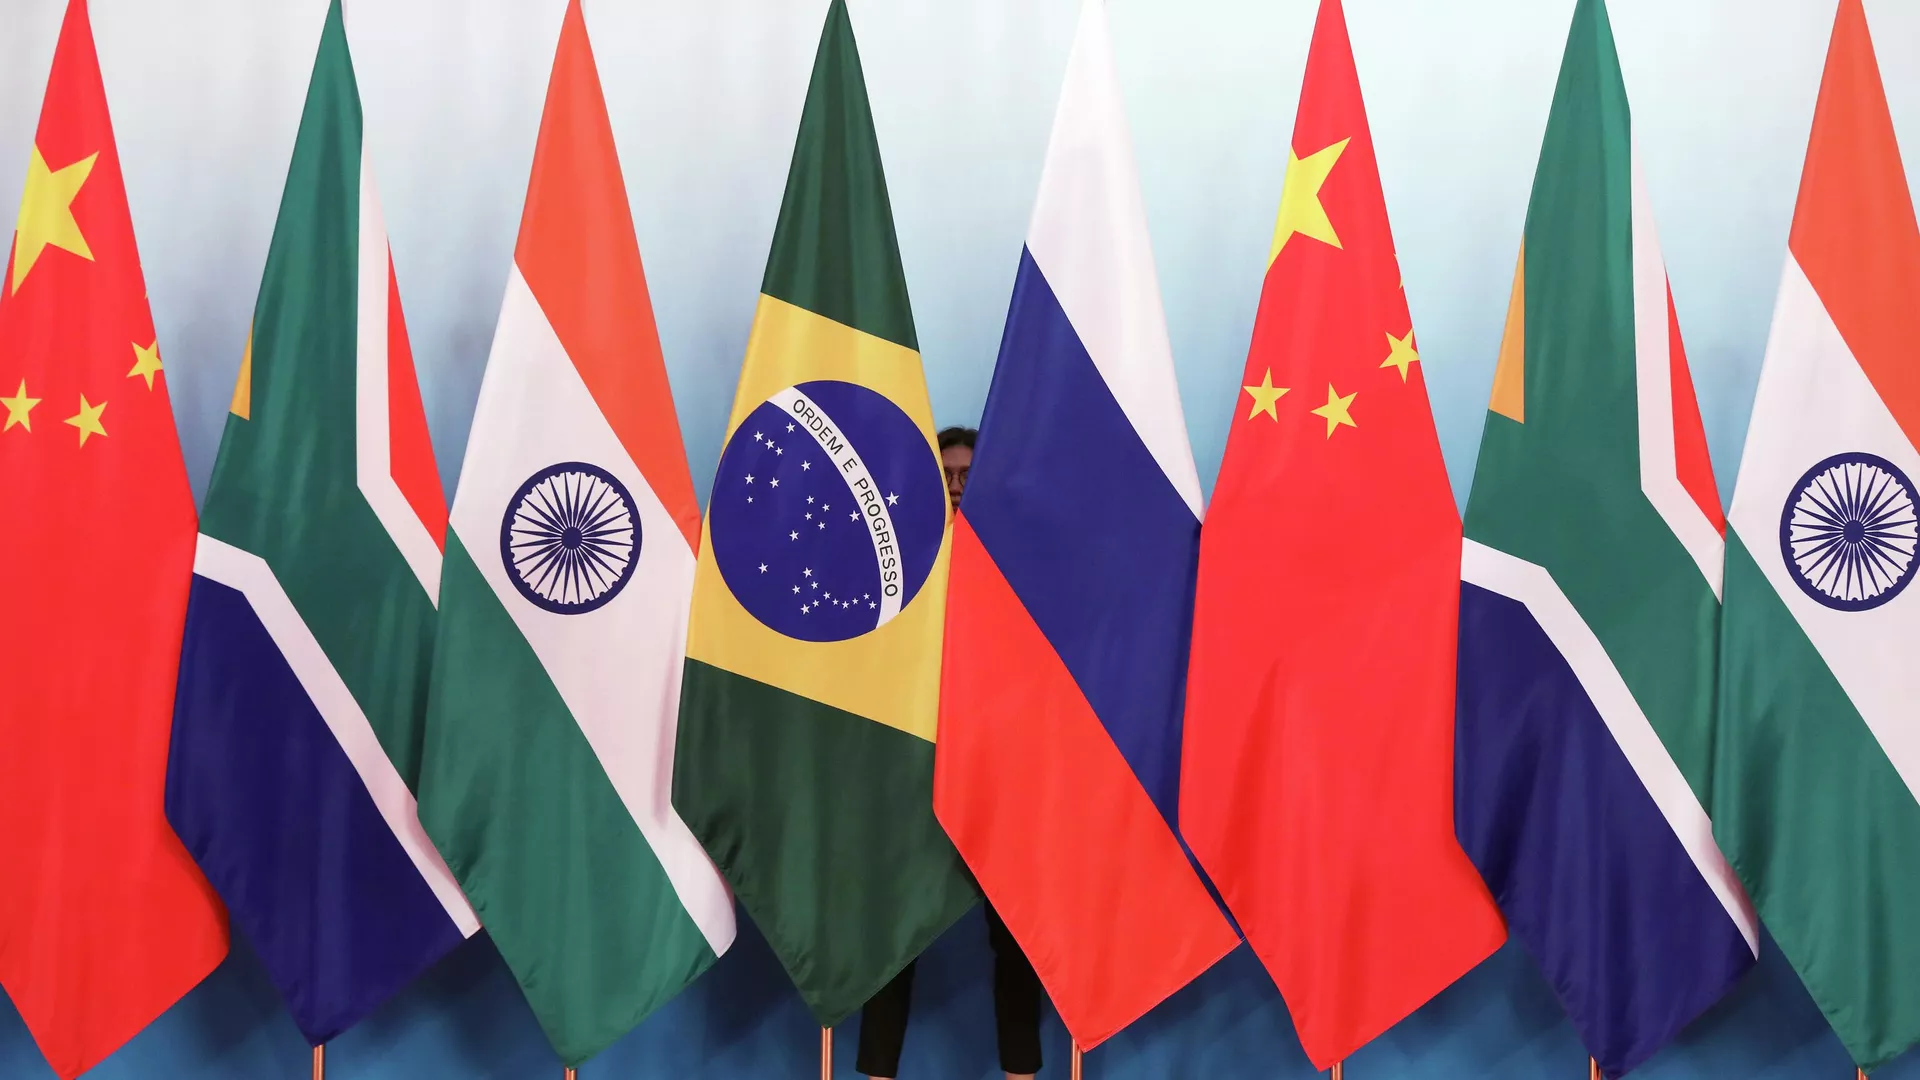 Staff worker stands behind national flags of Brazil, Russia, China, South Africa and India to tidy the flags ahead of a group photo during the BRICS Summit at the Xiamen International Conference and Exhibition Center in Xiamen, southeastern China's Fujian Province, Monday, Sept. 4, 2017. - Sputnik International, 1920, 02.06.2023